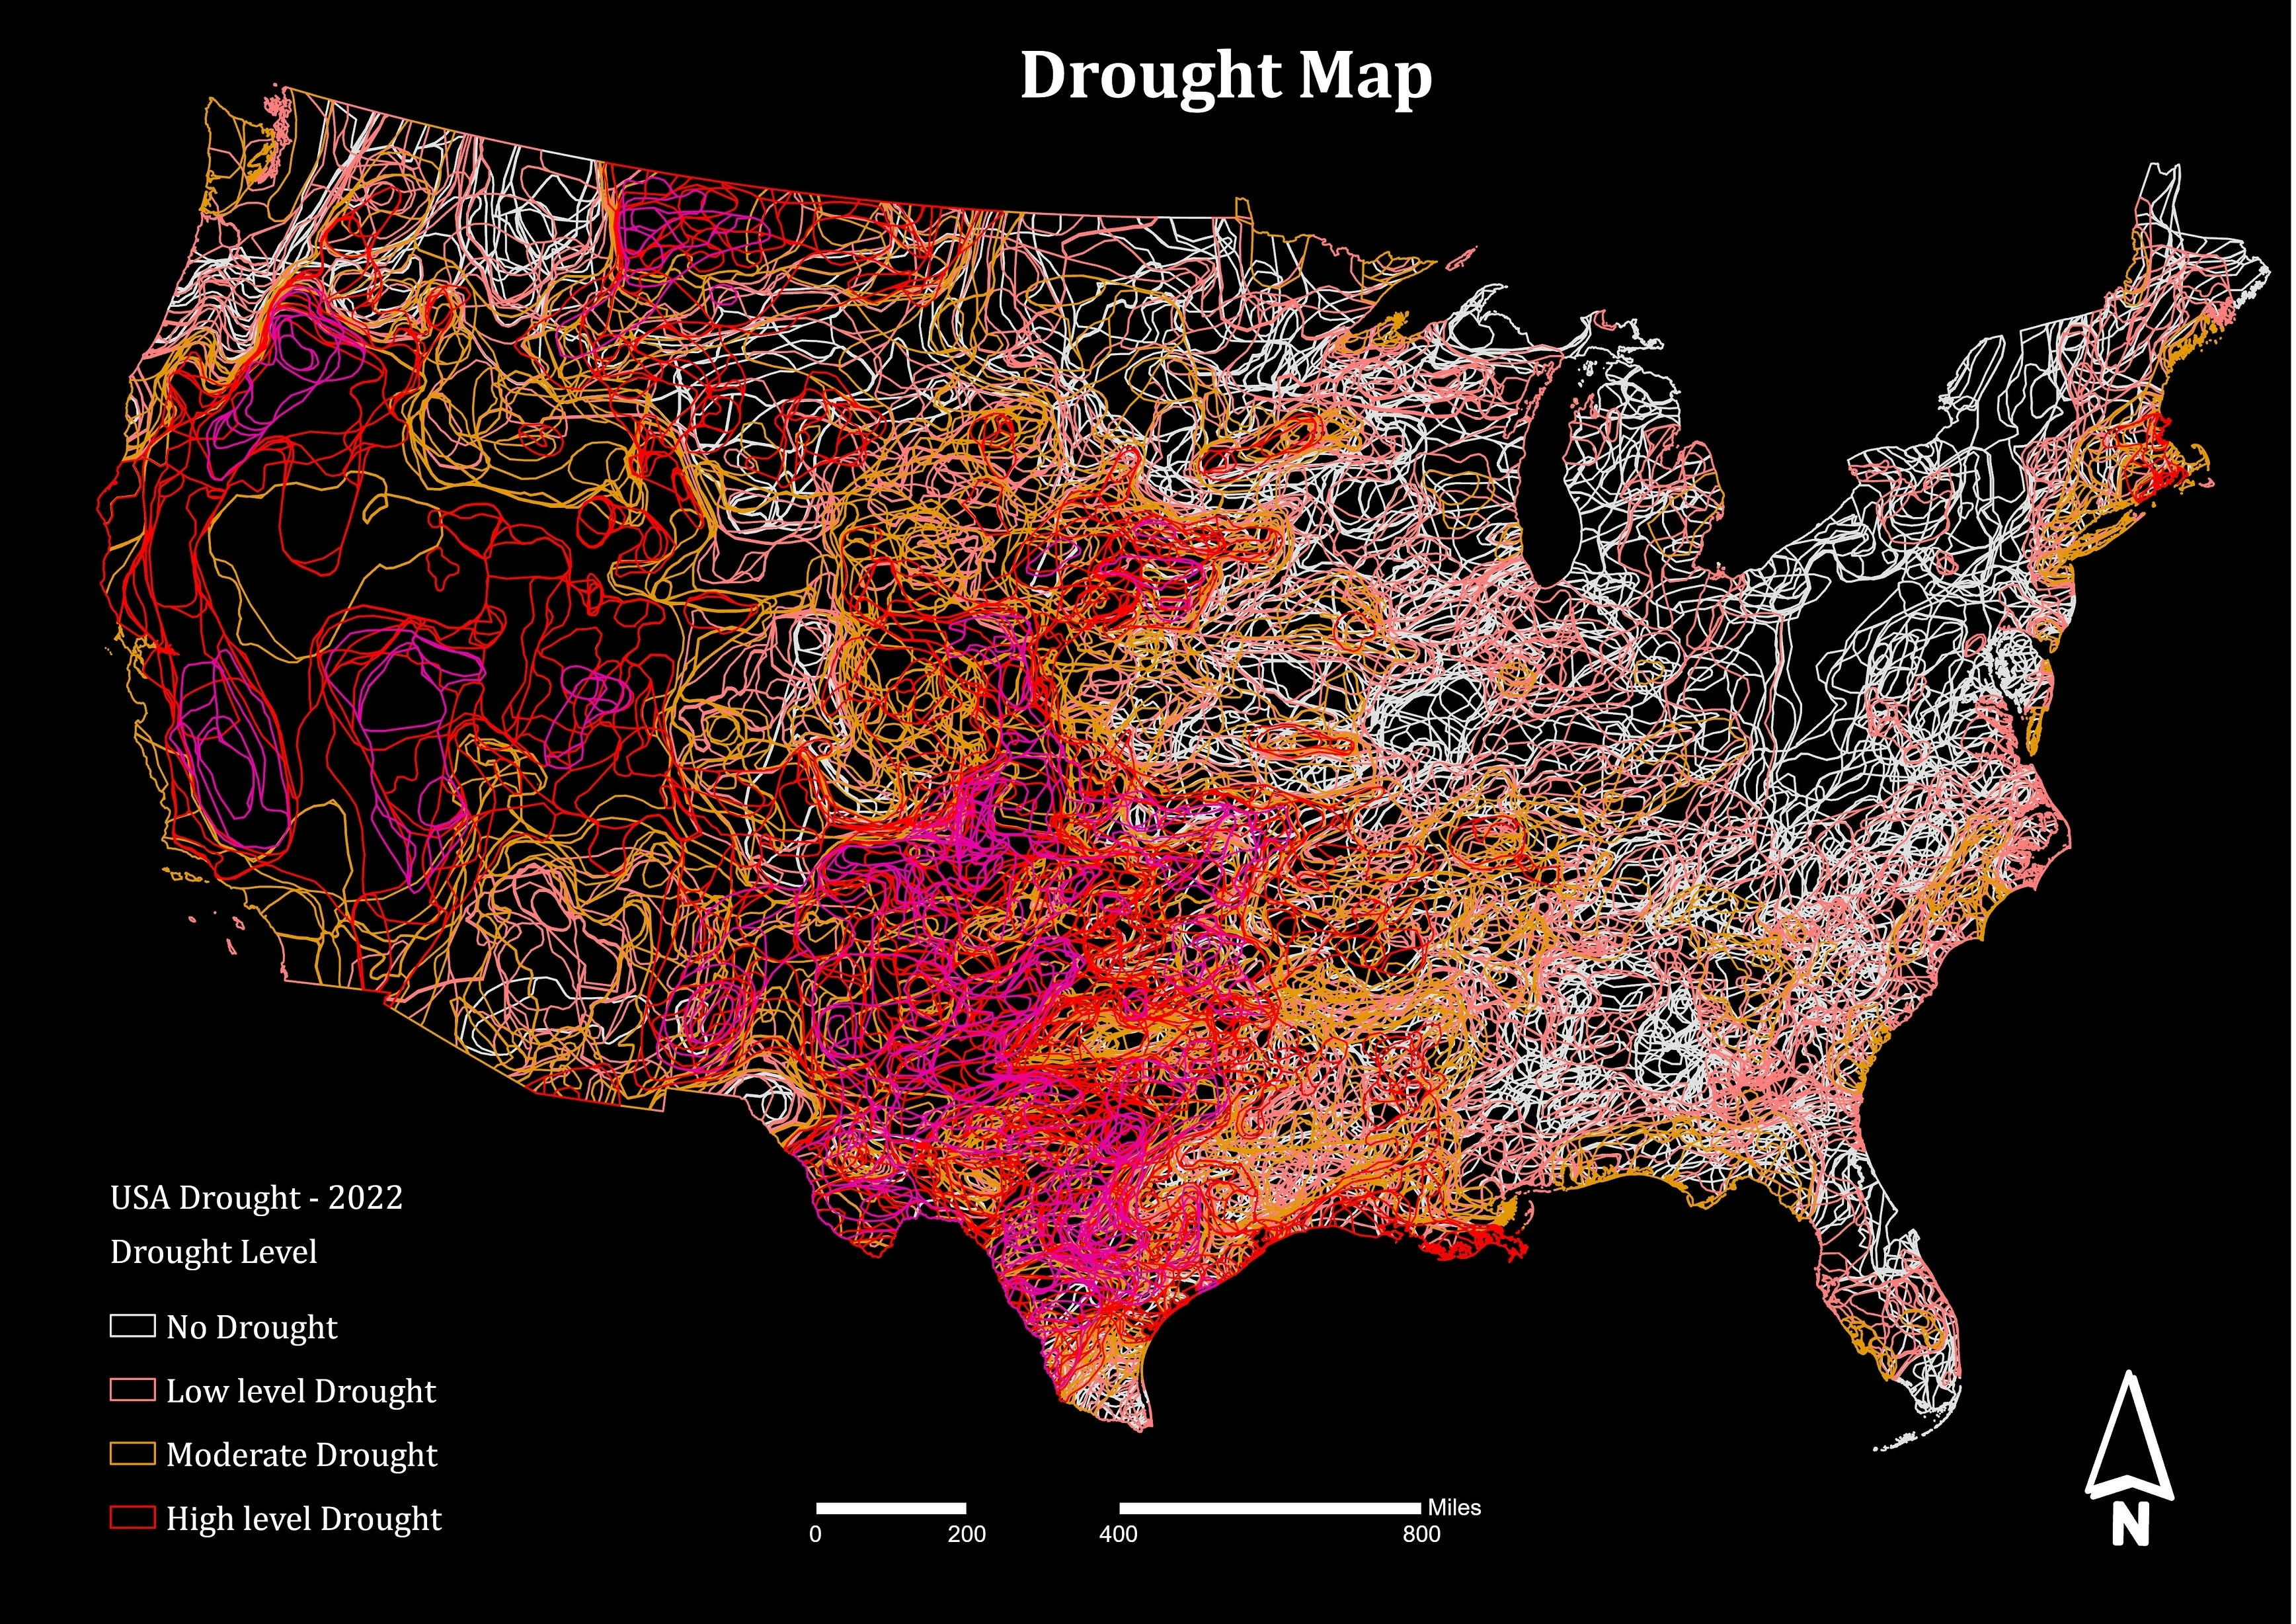 USA Drought Map for the Year 2022